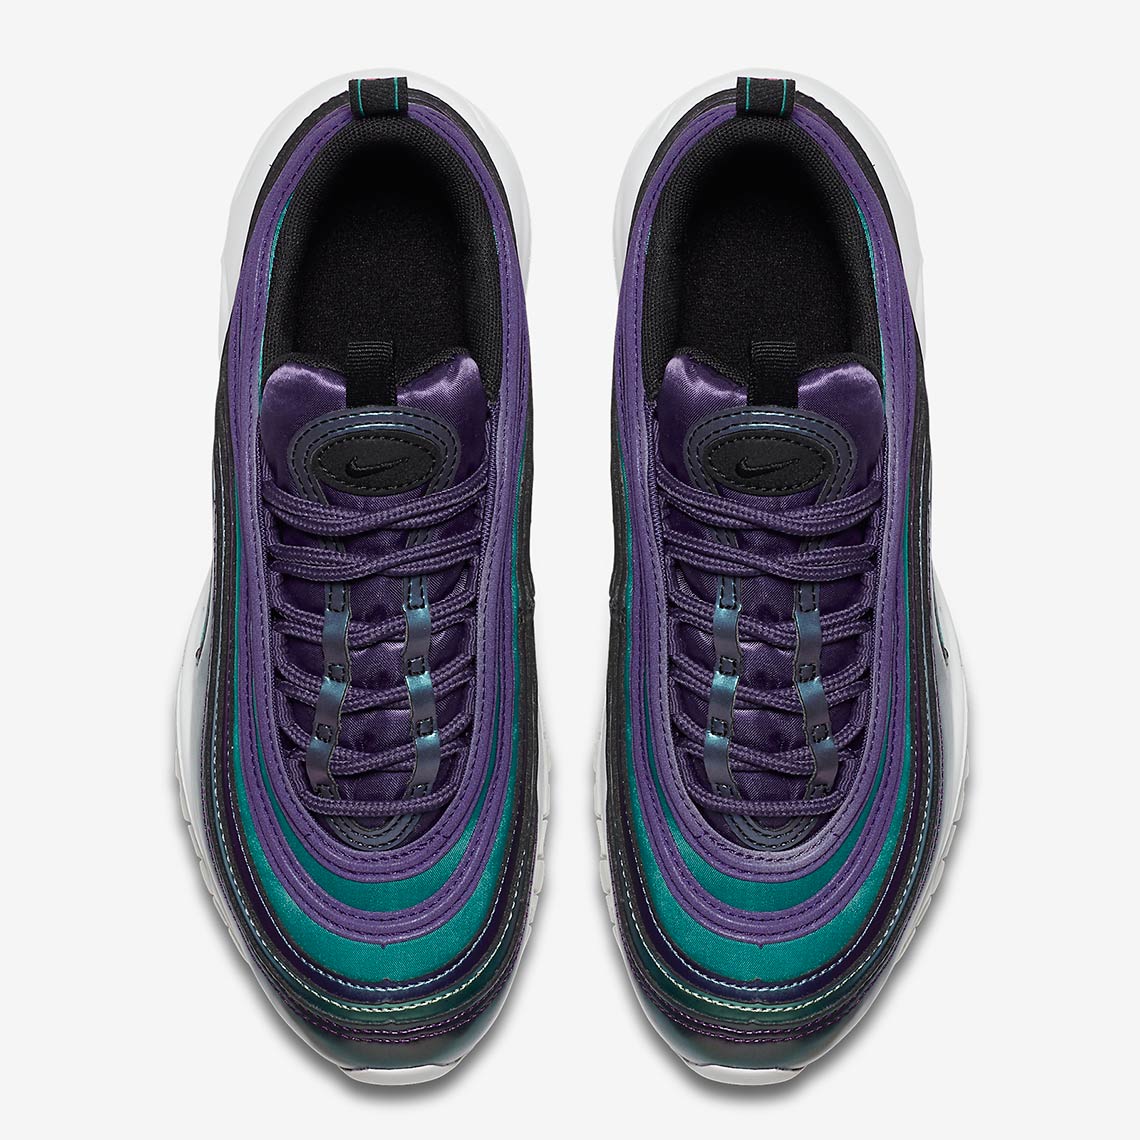 The Nike VaporMax 97 Dons The Classic Grape Colorway